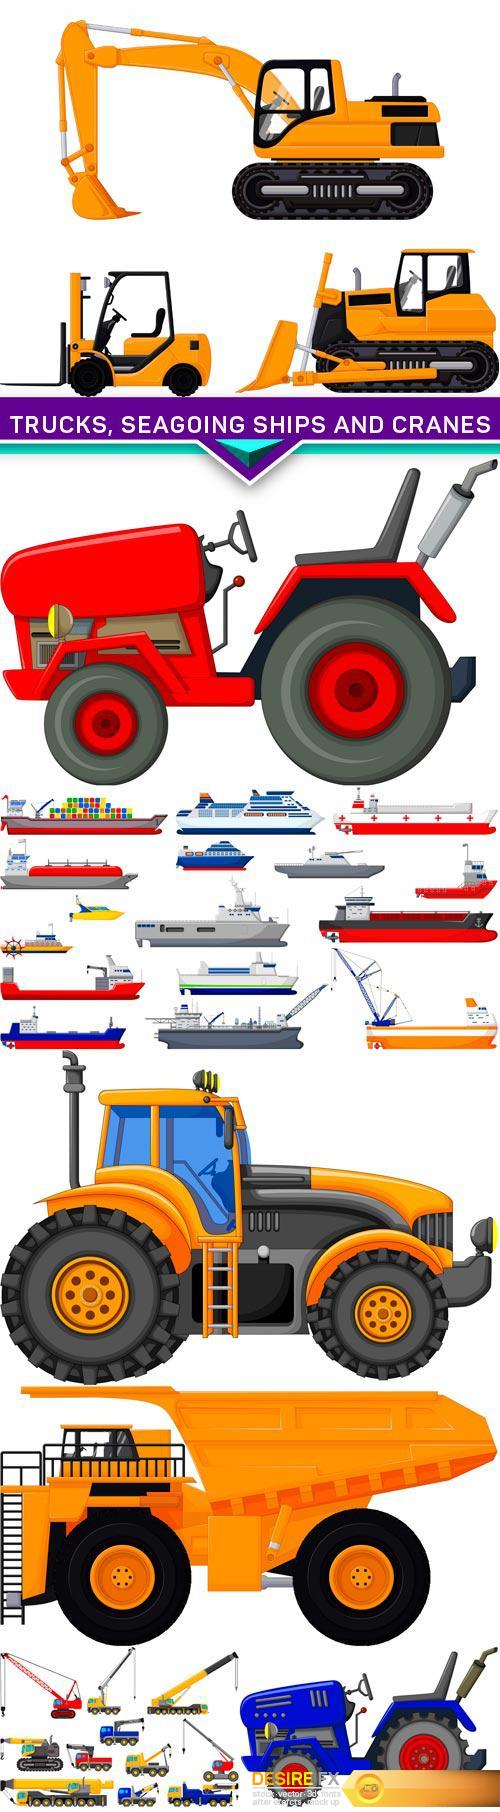 Trucks, seagoing ships and cranes 7X JPEG